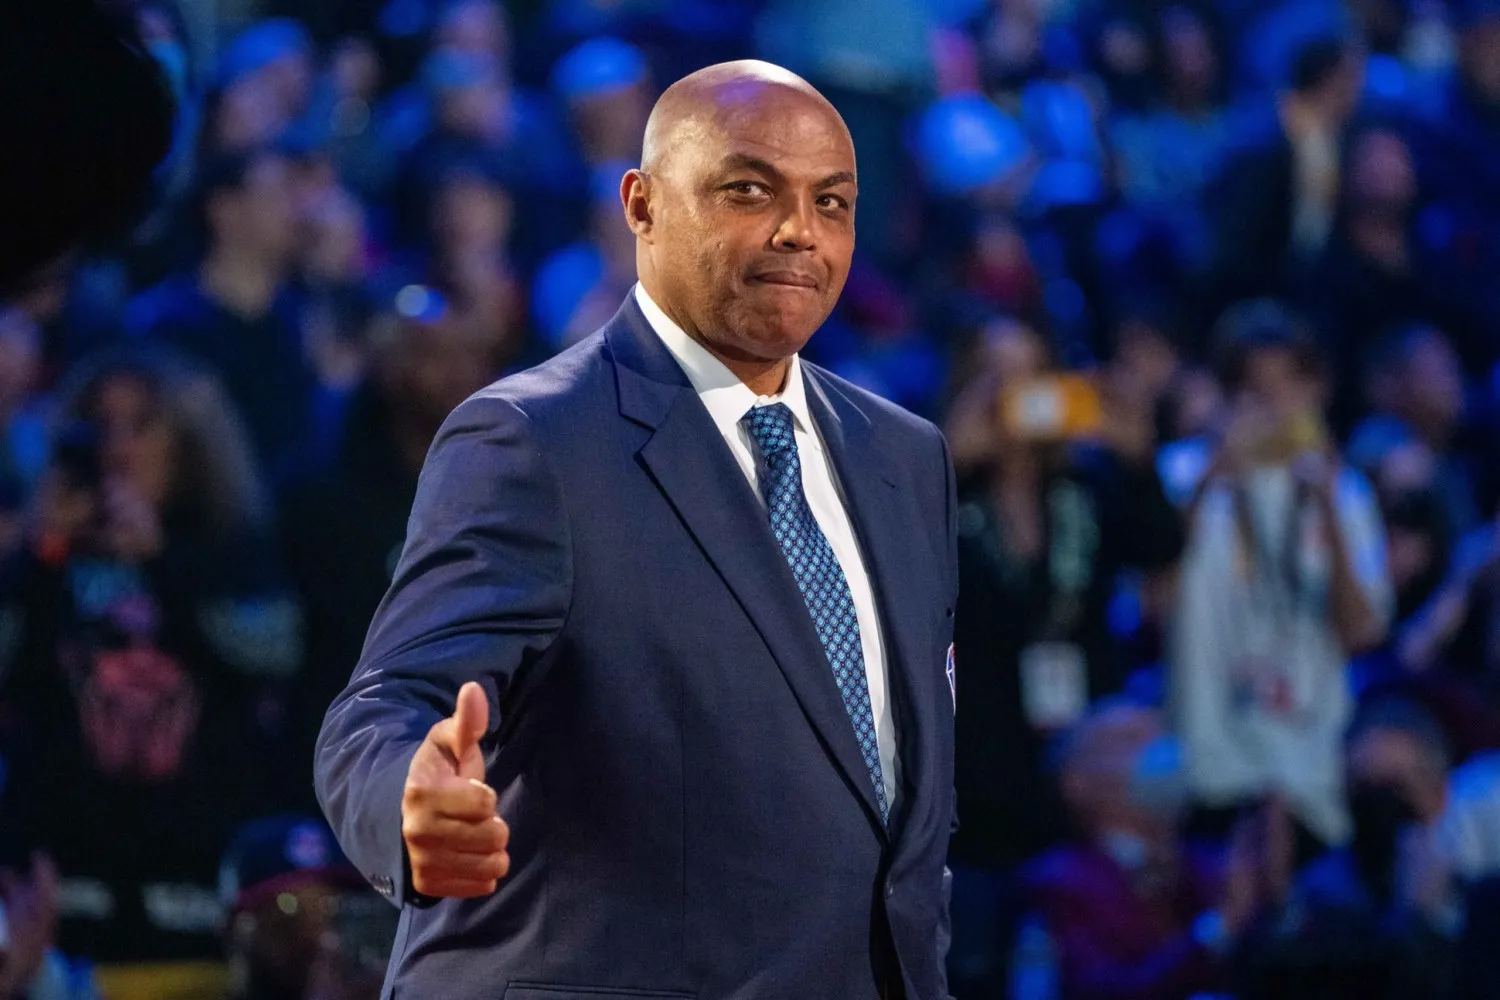 Charles Barkley Hints at Job Hunt What's Next for 'Inside The NBA' Amid Broadcast Changes-